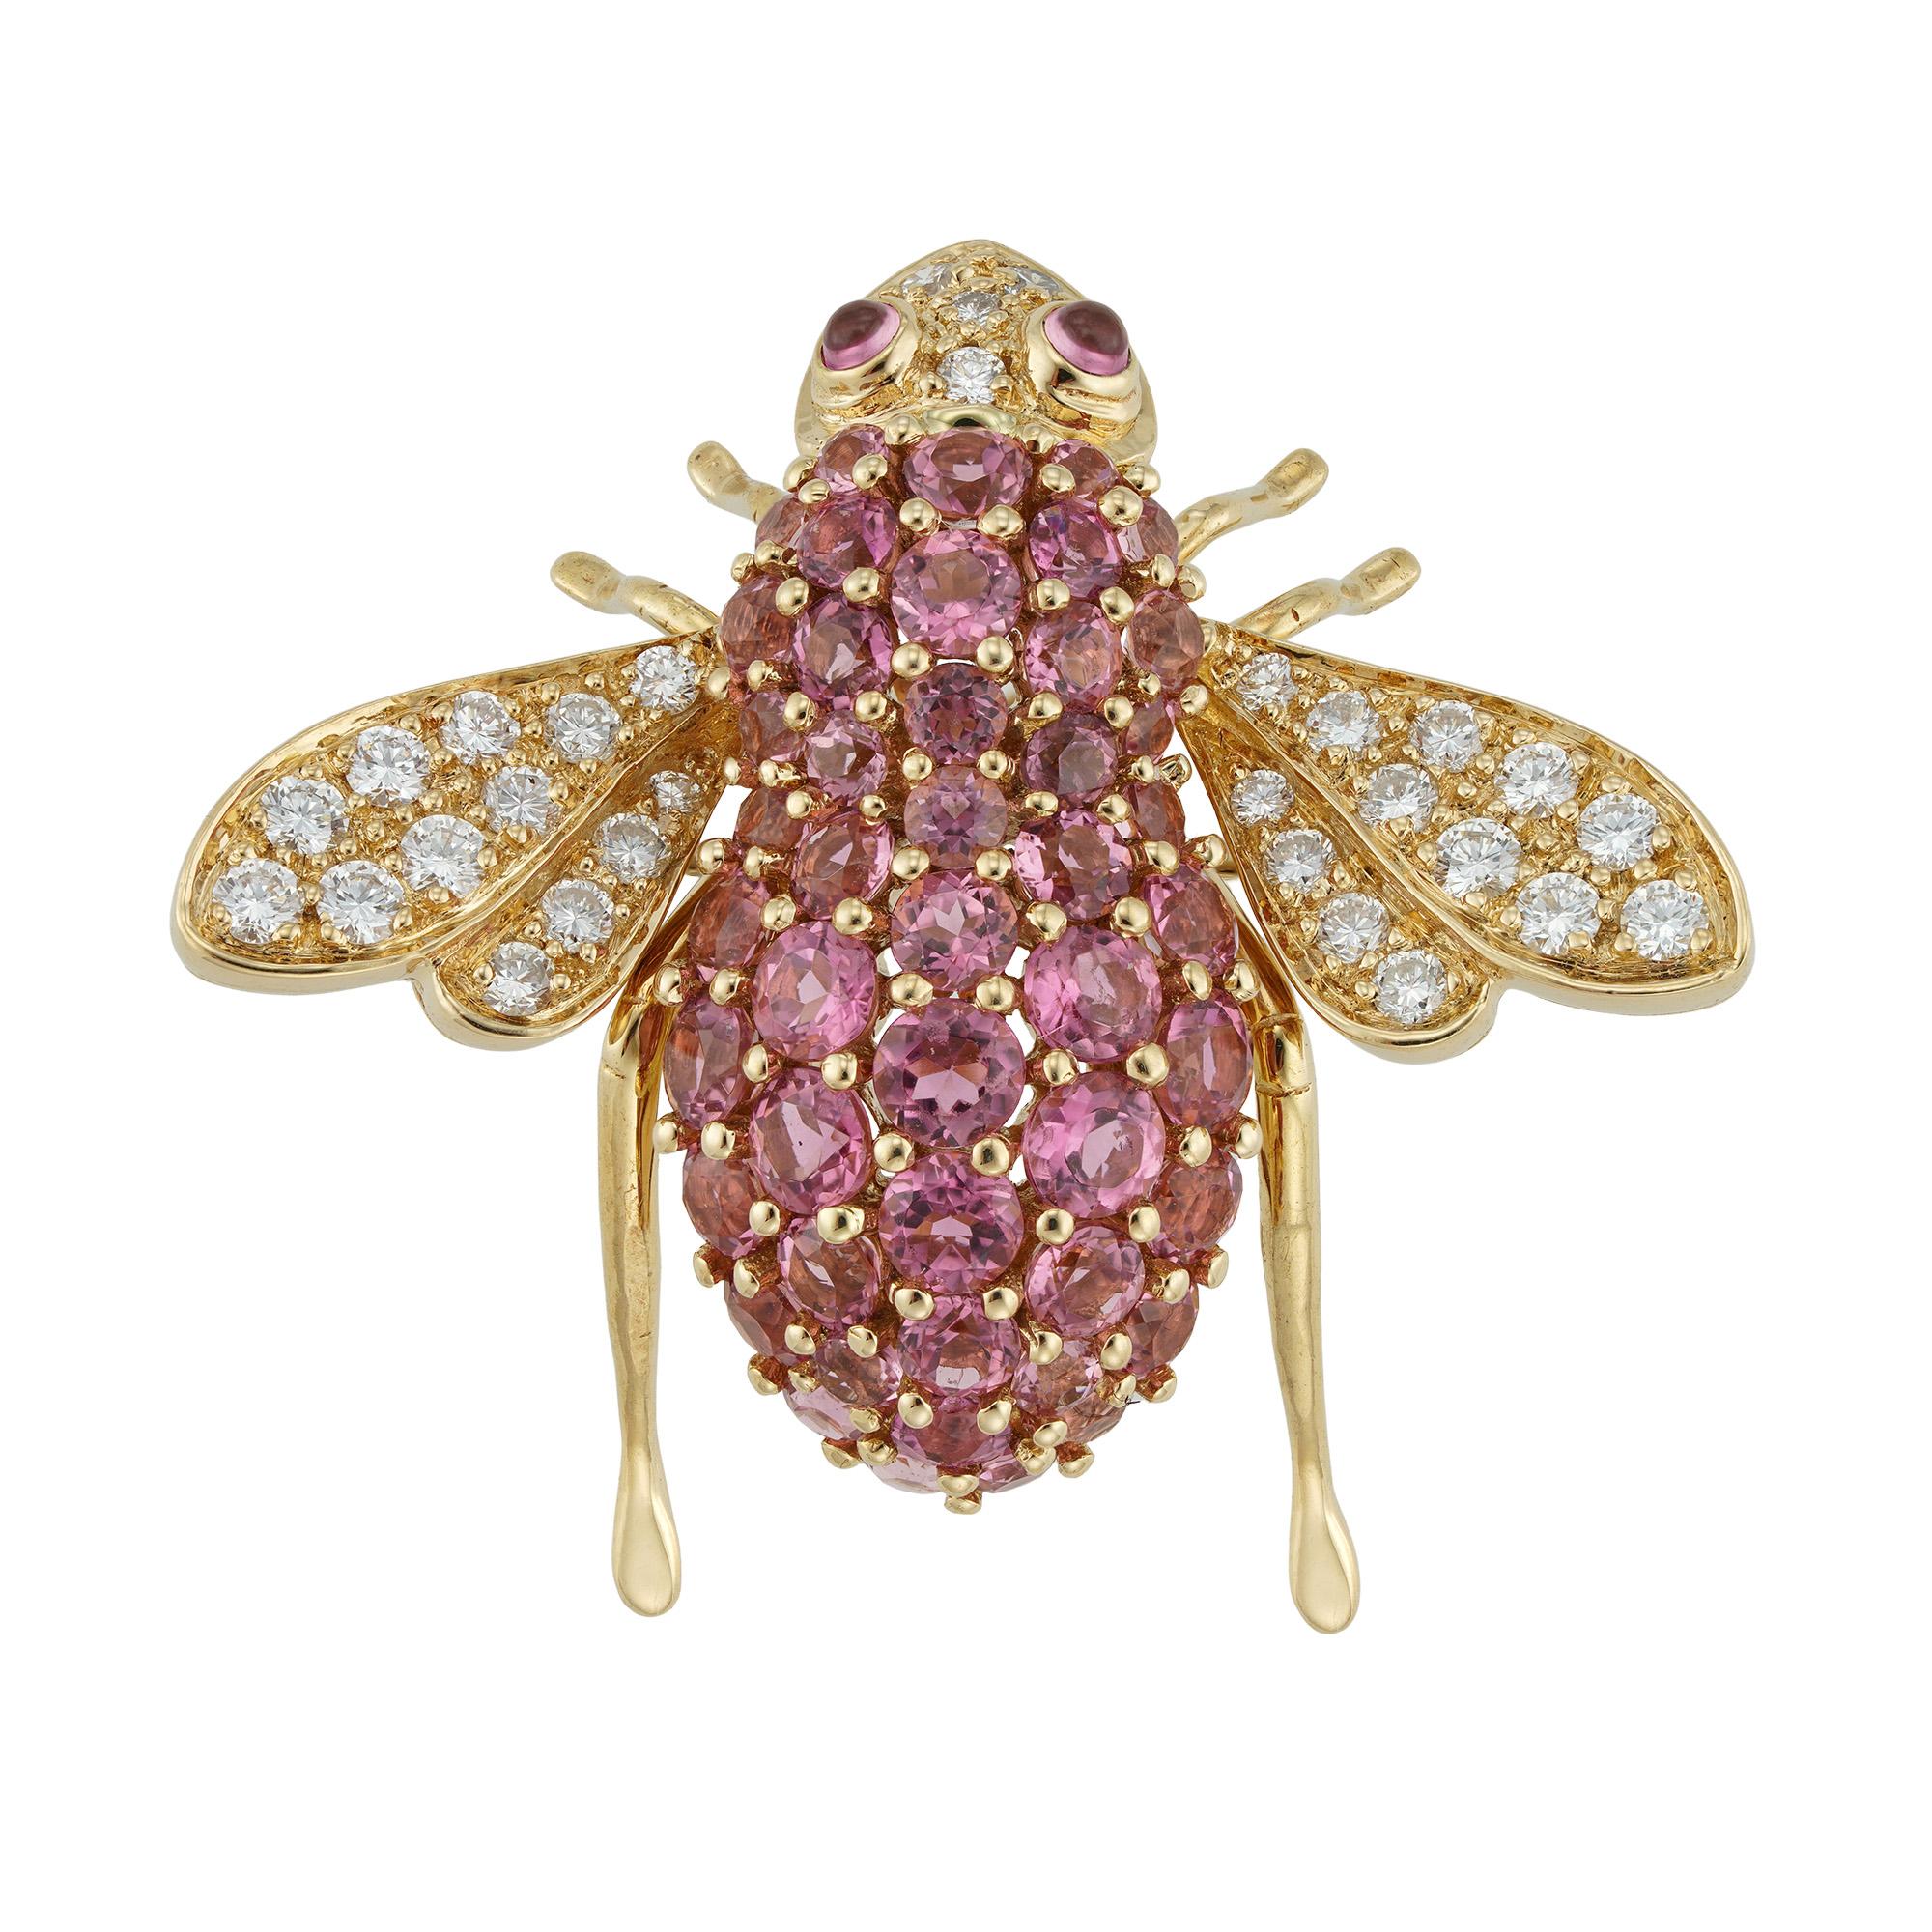 A pink tourmaline and diamond bee brooch, the wings and the head set with thirty-one round brilliant-cut diamonds estimated to weigh 0.9 carats in total, the thorax, the abdomen and the eyes set with forty-nine round faceted pink tourmalines of